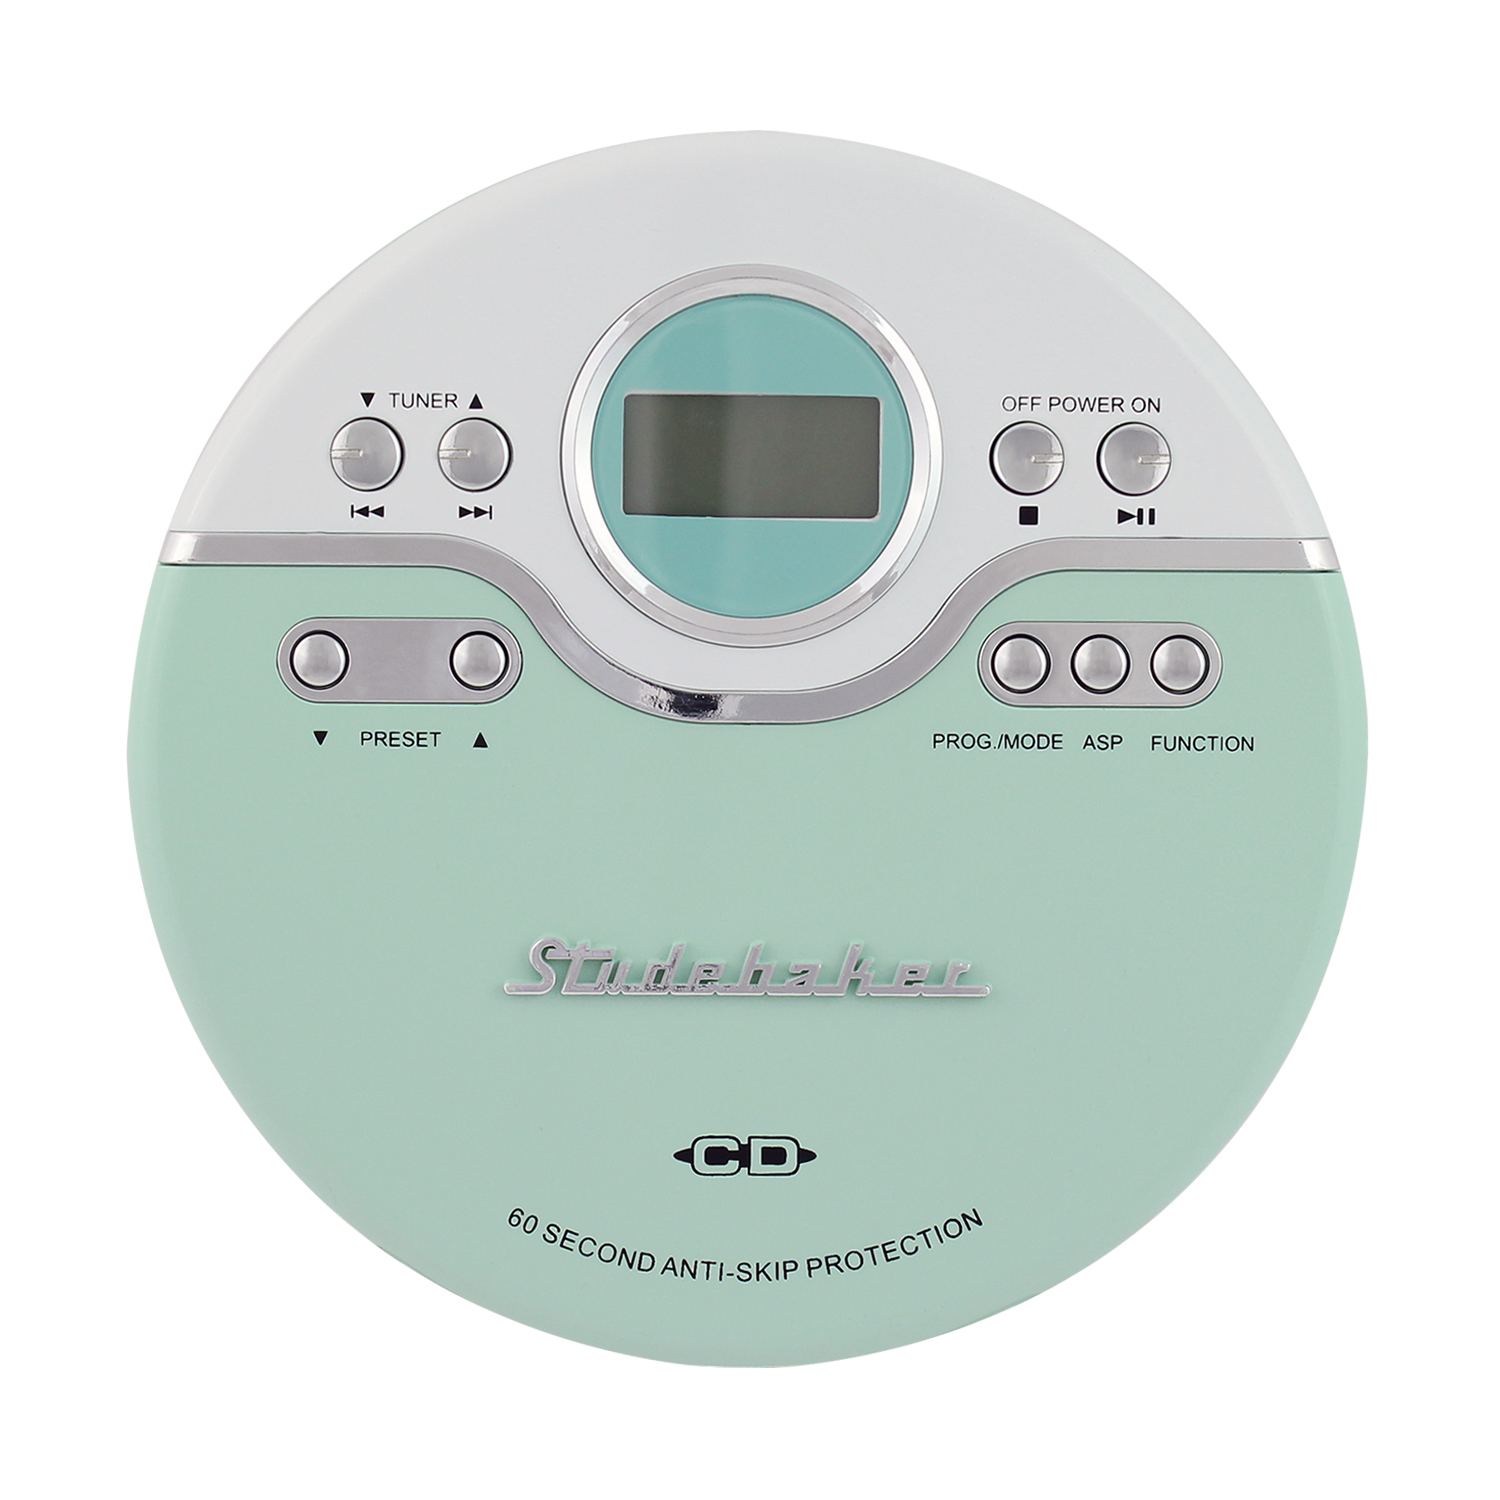 Studebaker Sb3703mw Personal Jogging CD Player with FM Pll Radio (Mint Green/white) - image 4 of 5